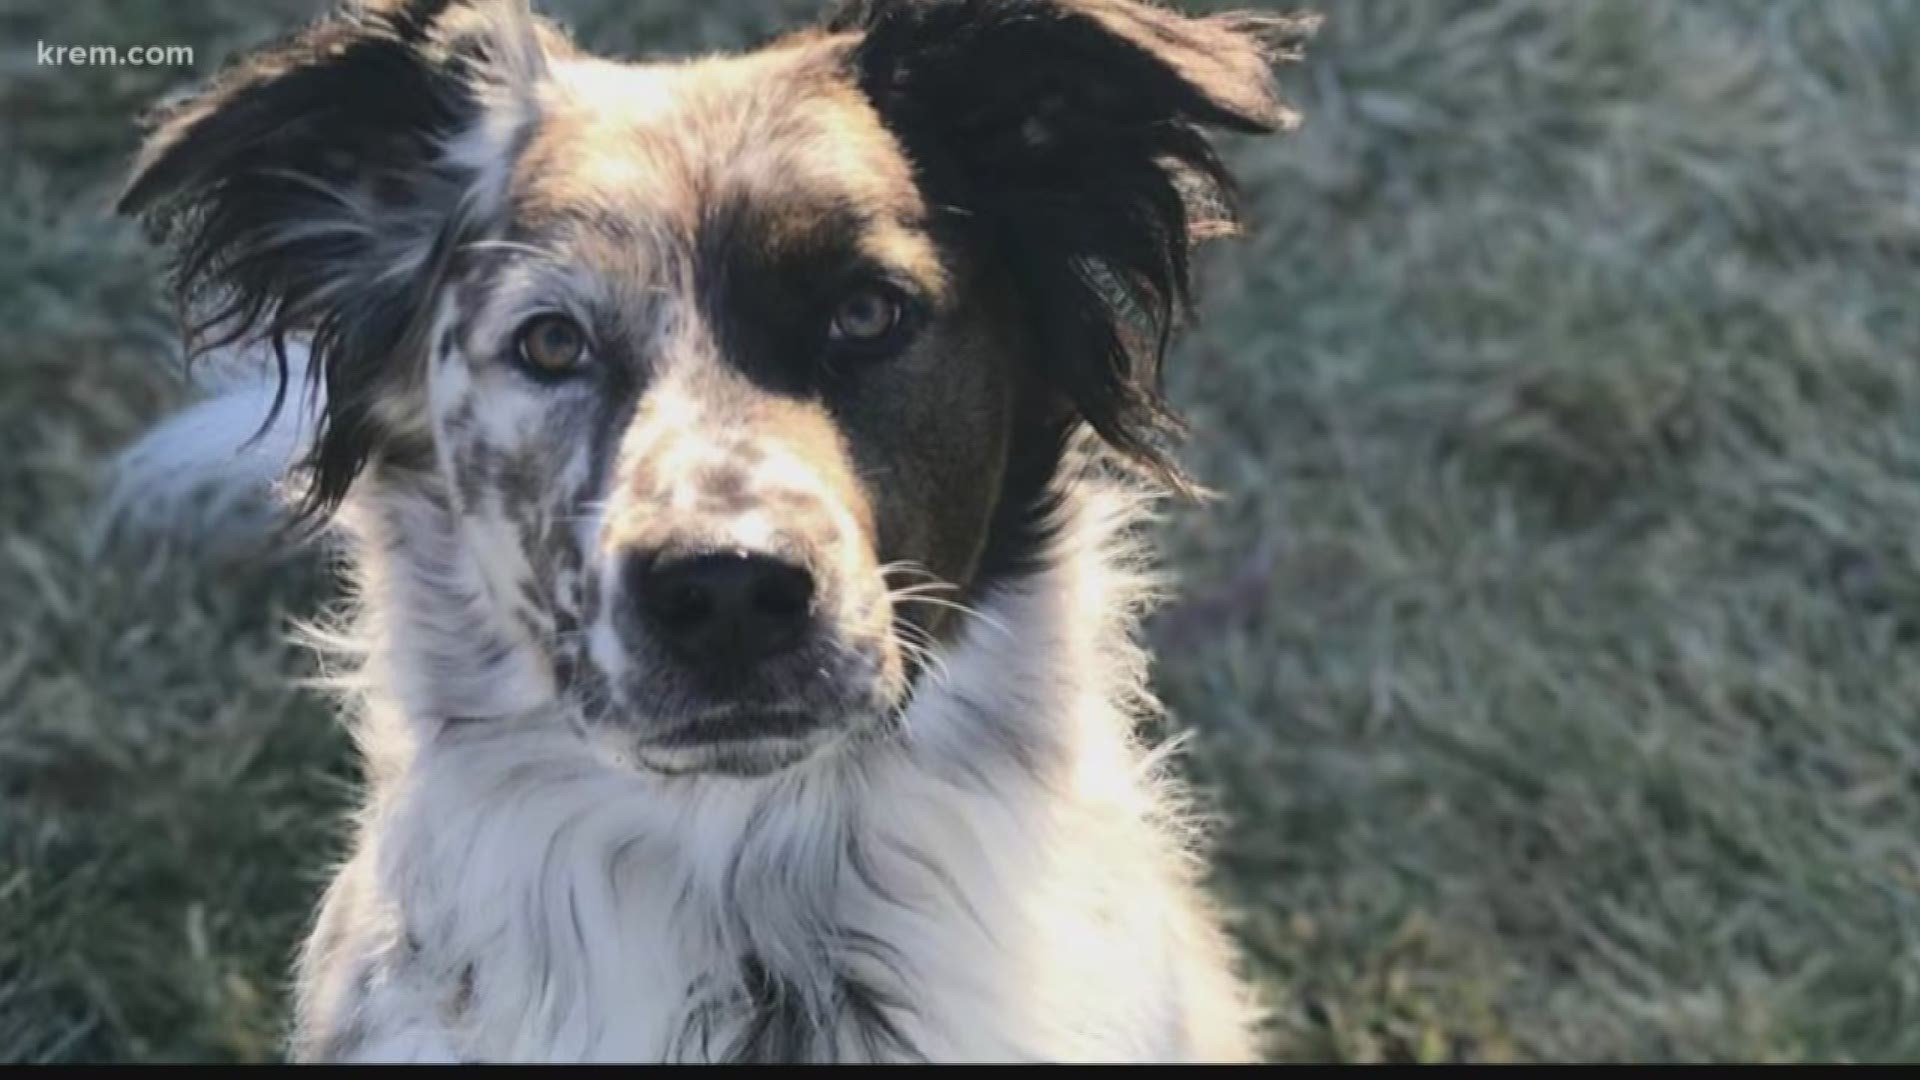 A Spokane man is devastated after his dog was killed after being electrocuted in downtown Spokane due to an apparent heated sidewalk malfunction.